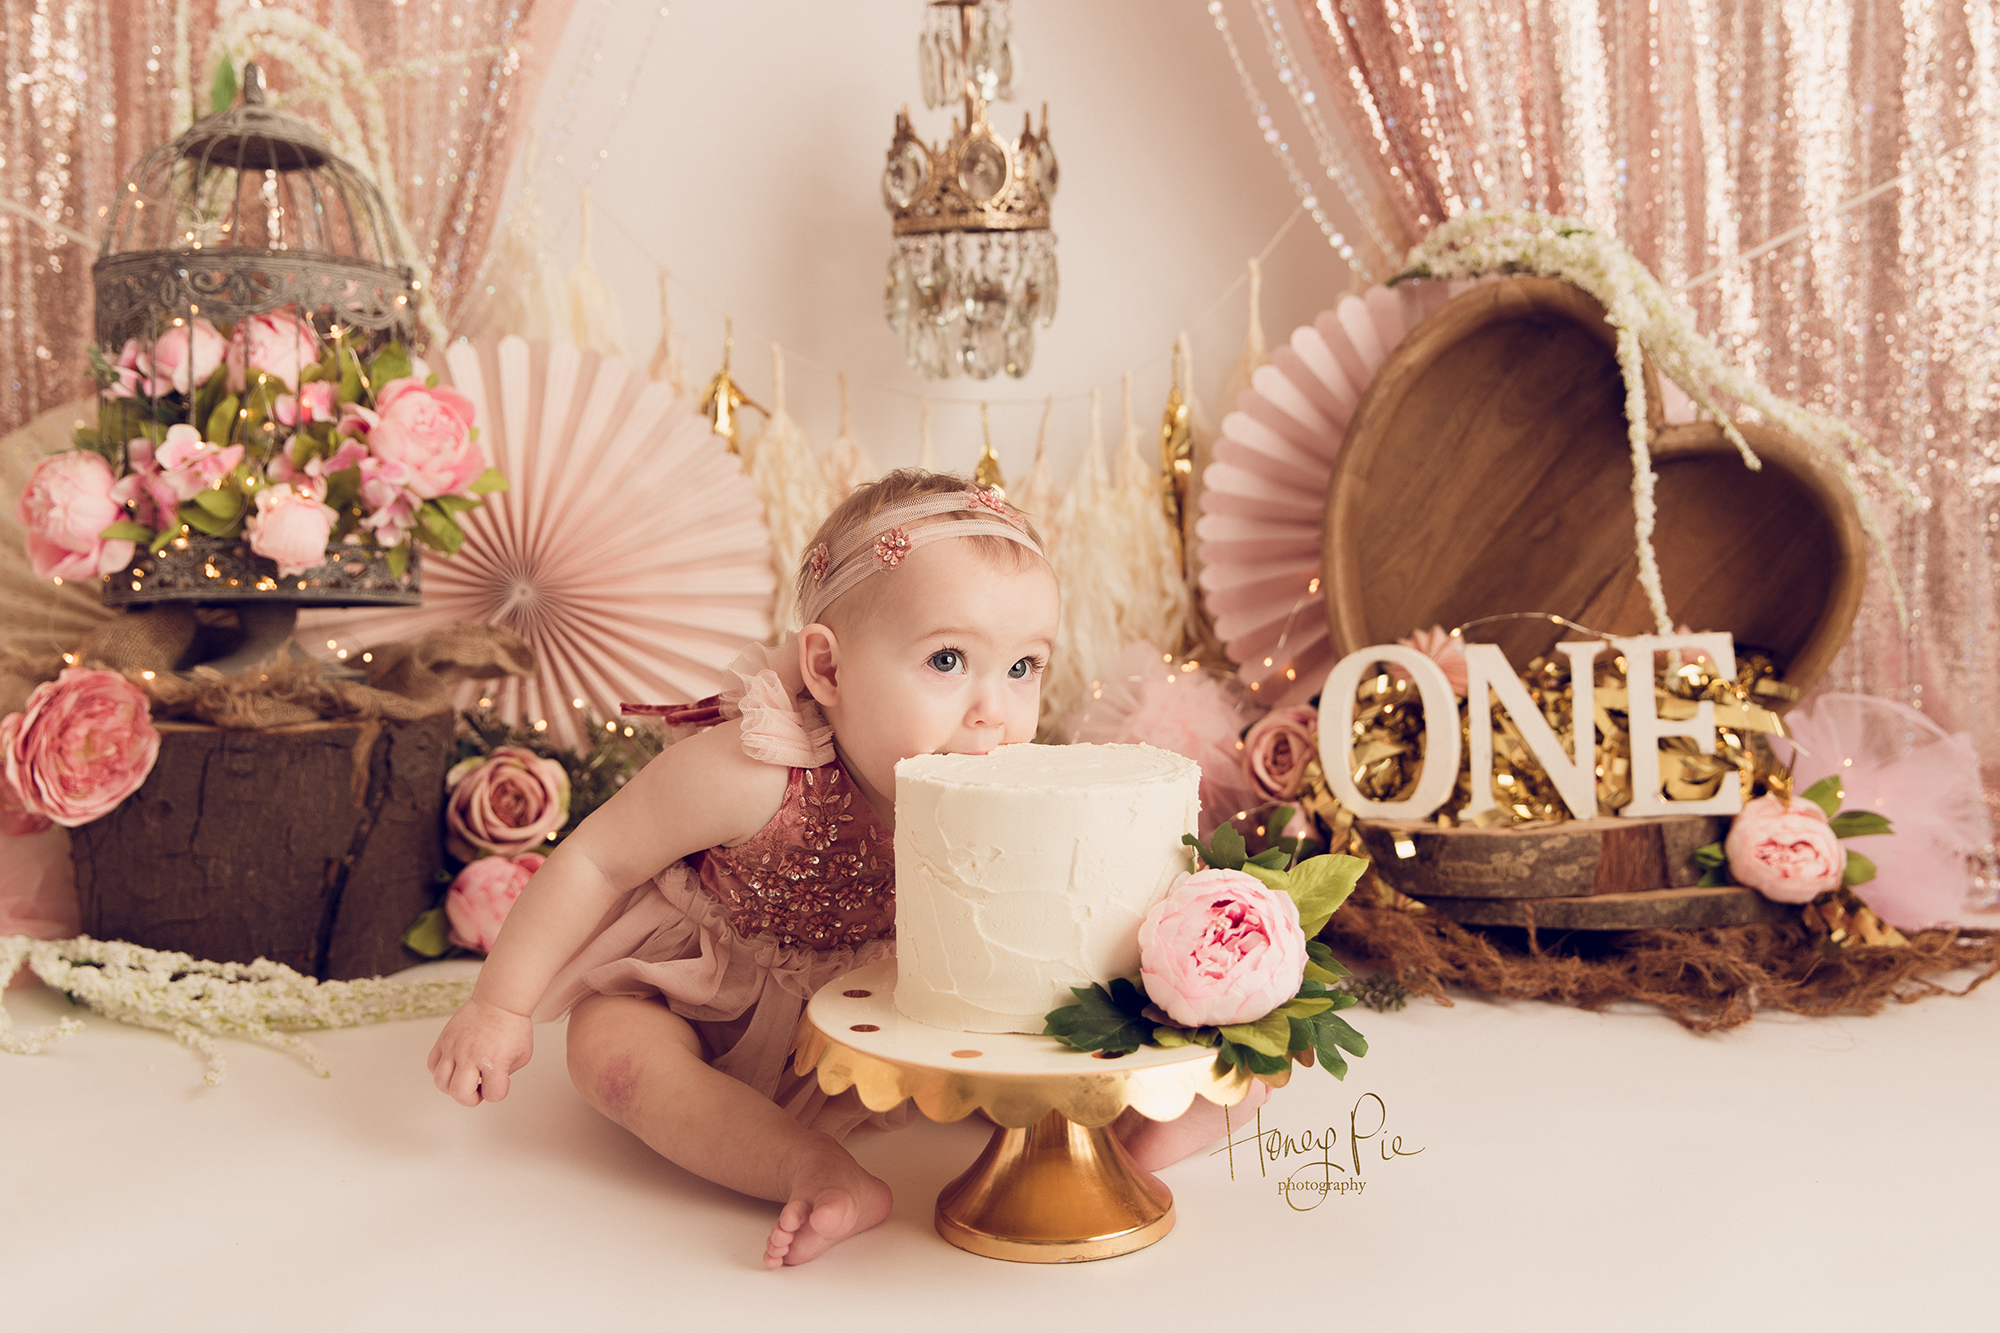 Baby face diving into cake at first birthday photoshoot